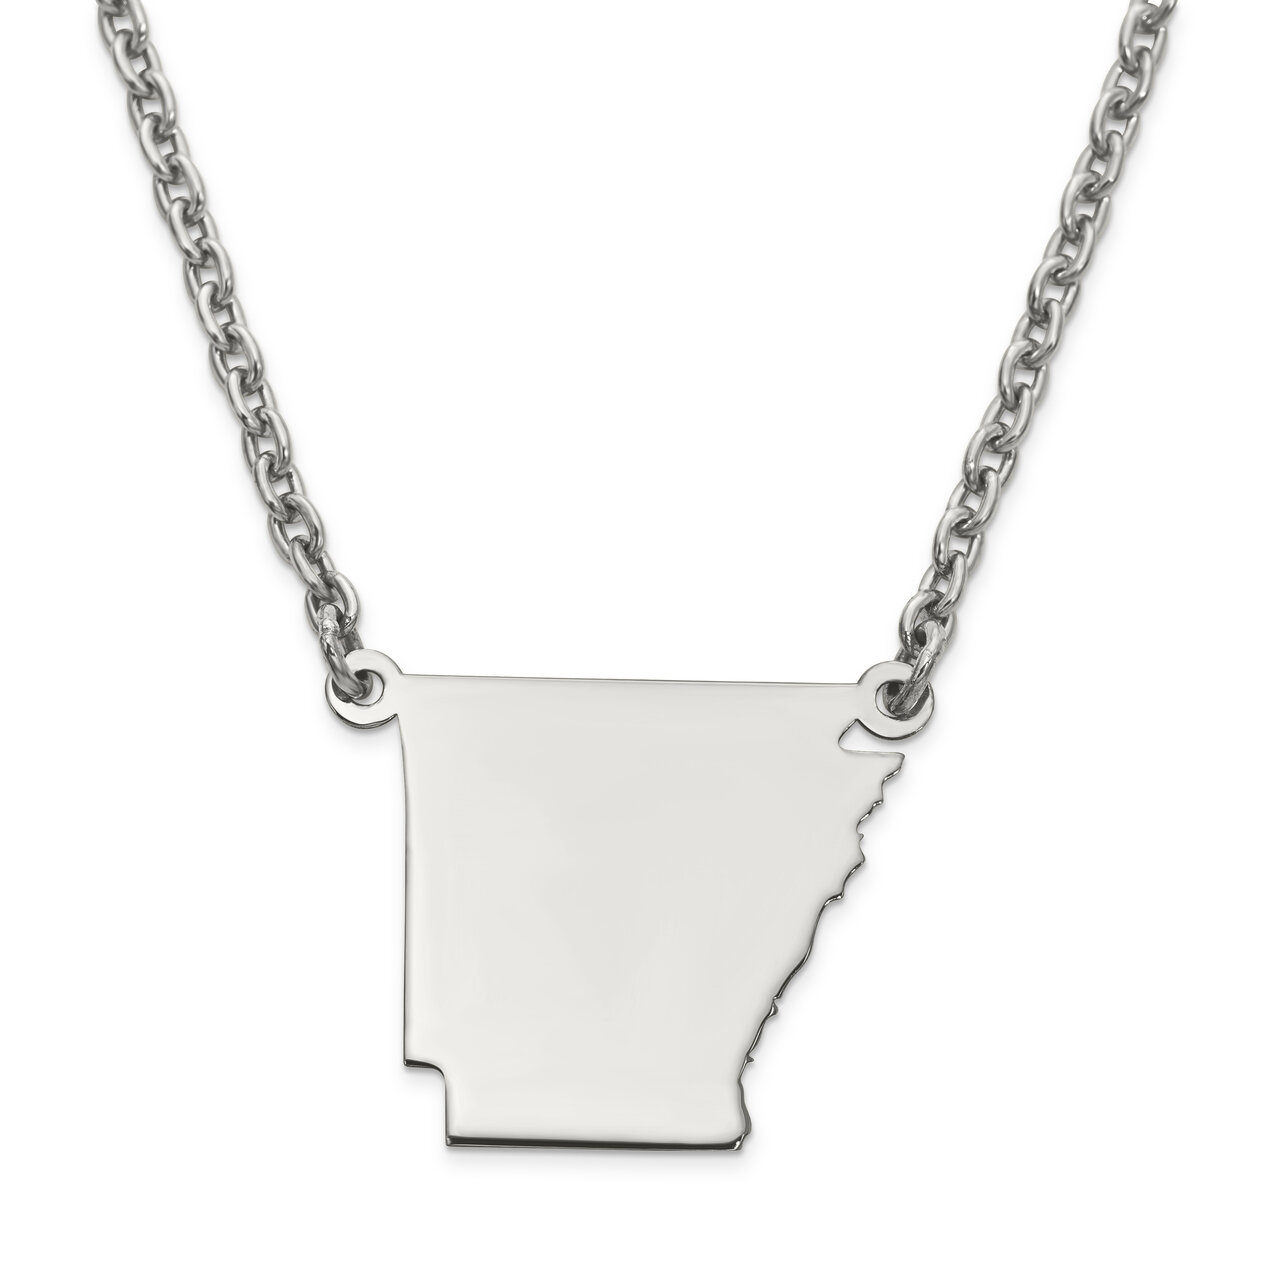 Arkansas State Pendant Necklace with Chain 14k White Gold Engravable XNA706W-AR